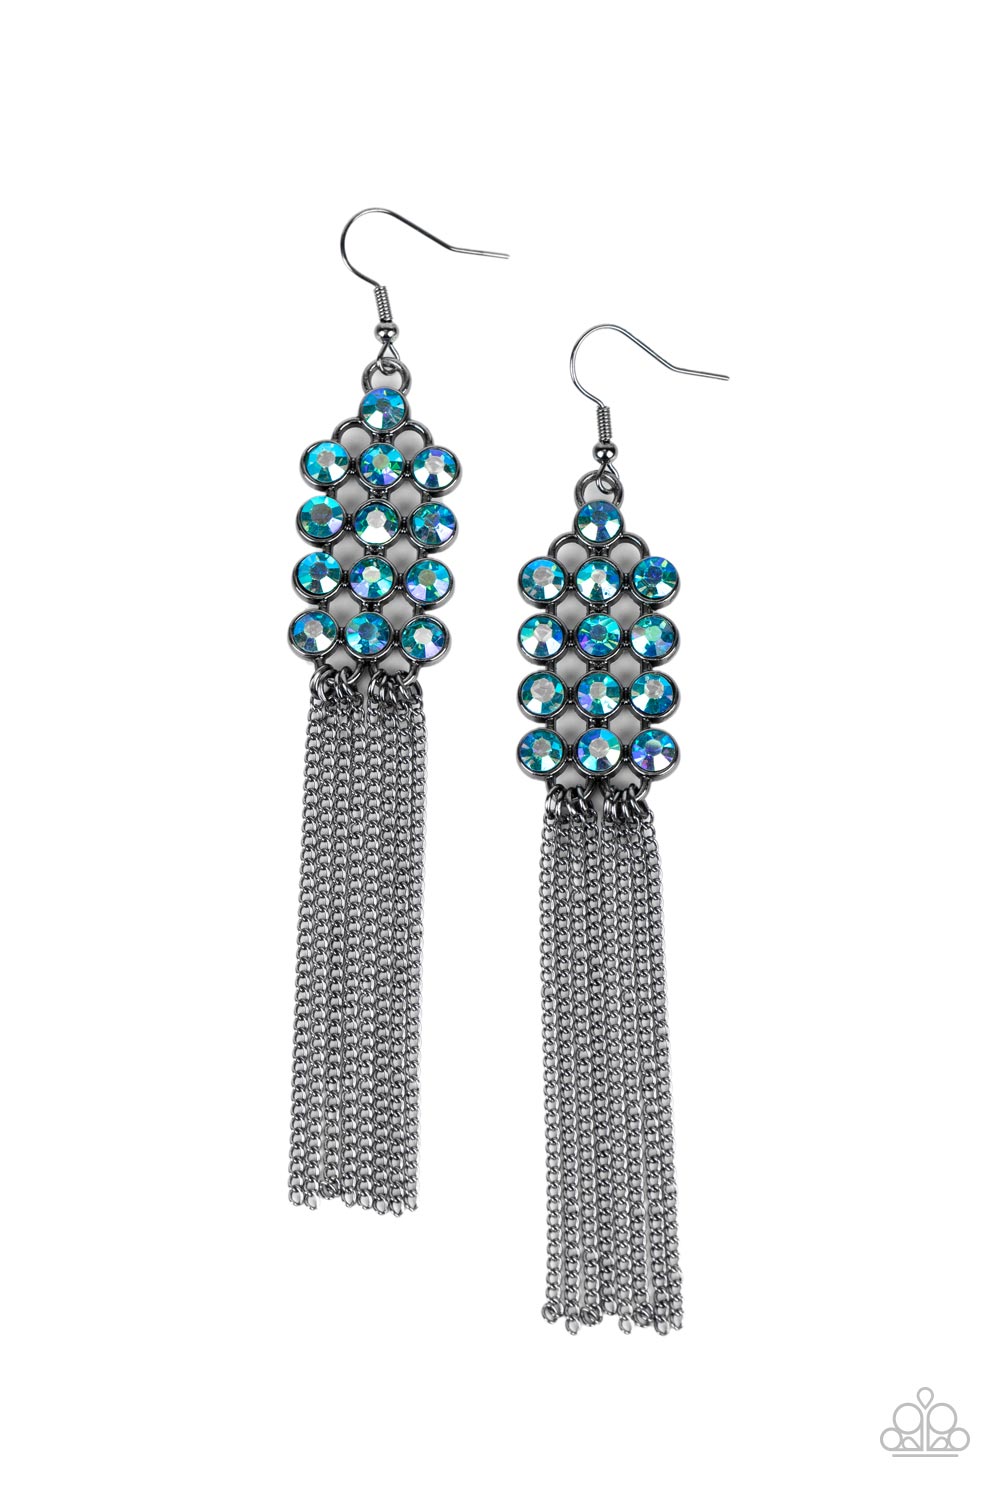 Tasteful Tassel - Multi Oil Spill Earrings encased in sleek hematite fittings, rows of glittery multi-colored oil spill rhinestones stack into a sparkly frame. Dainty gunmetal chains stream from the bottom of the dazzling frame, adding flirtatious movement to the timelessly tasseled display. Earring attaches to a standard fishhook fitting.  Sold as one pair of earrings.  Paparazzi Jewelry is lead and nickel free so it's perfect for sensitive skin too!